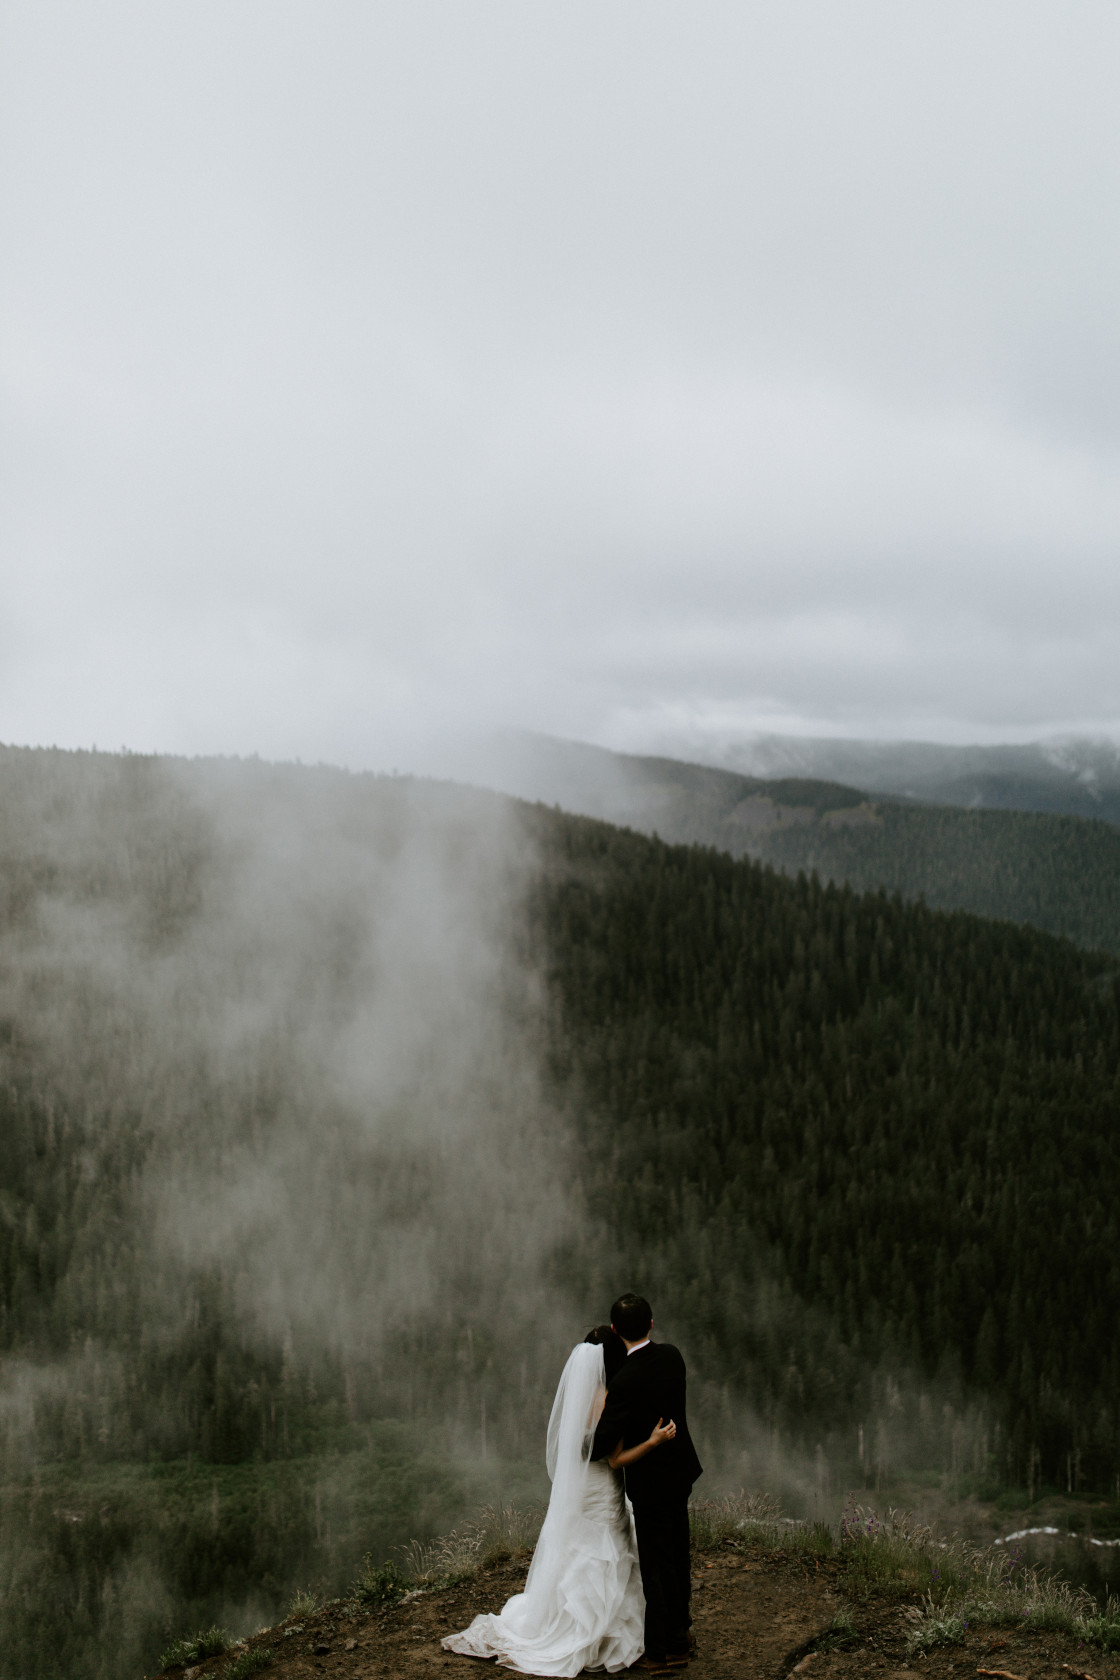 Alex and Valerie face each other with a view of the ravine near Mount Hood. Elopement wedding photography at Mount Hood by Sienna Plus Josh.